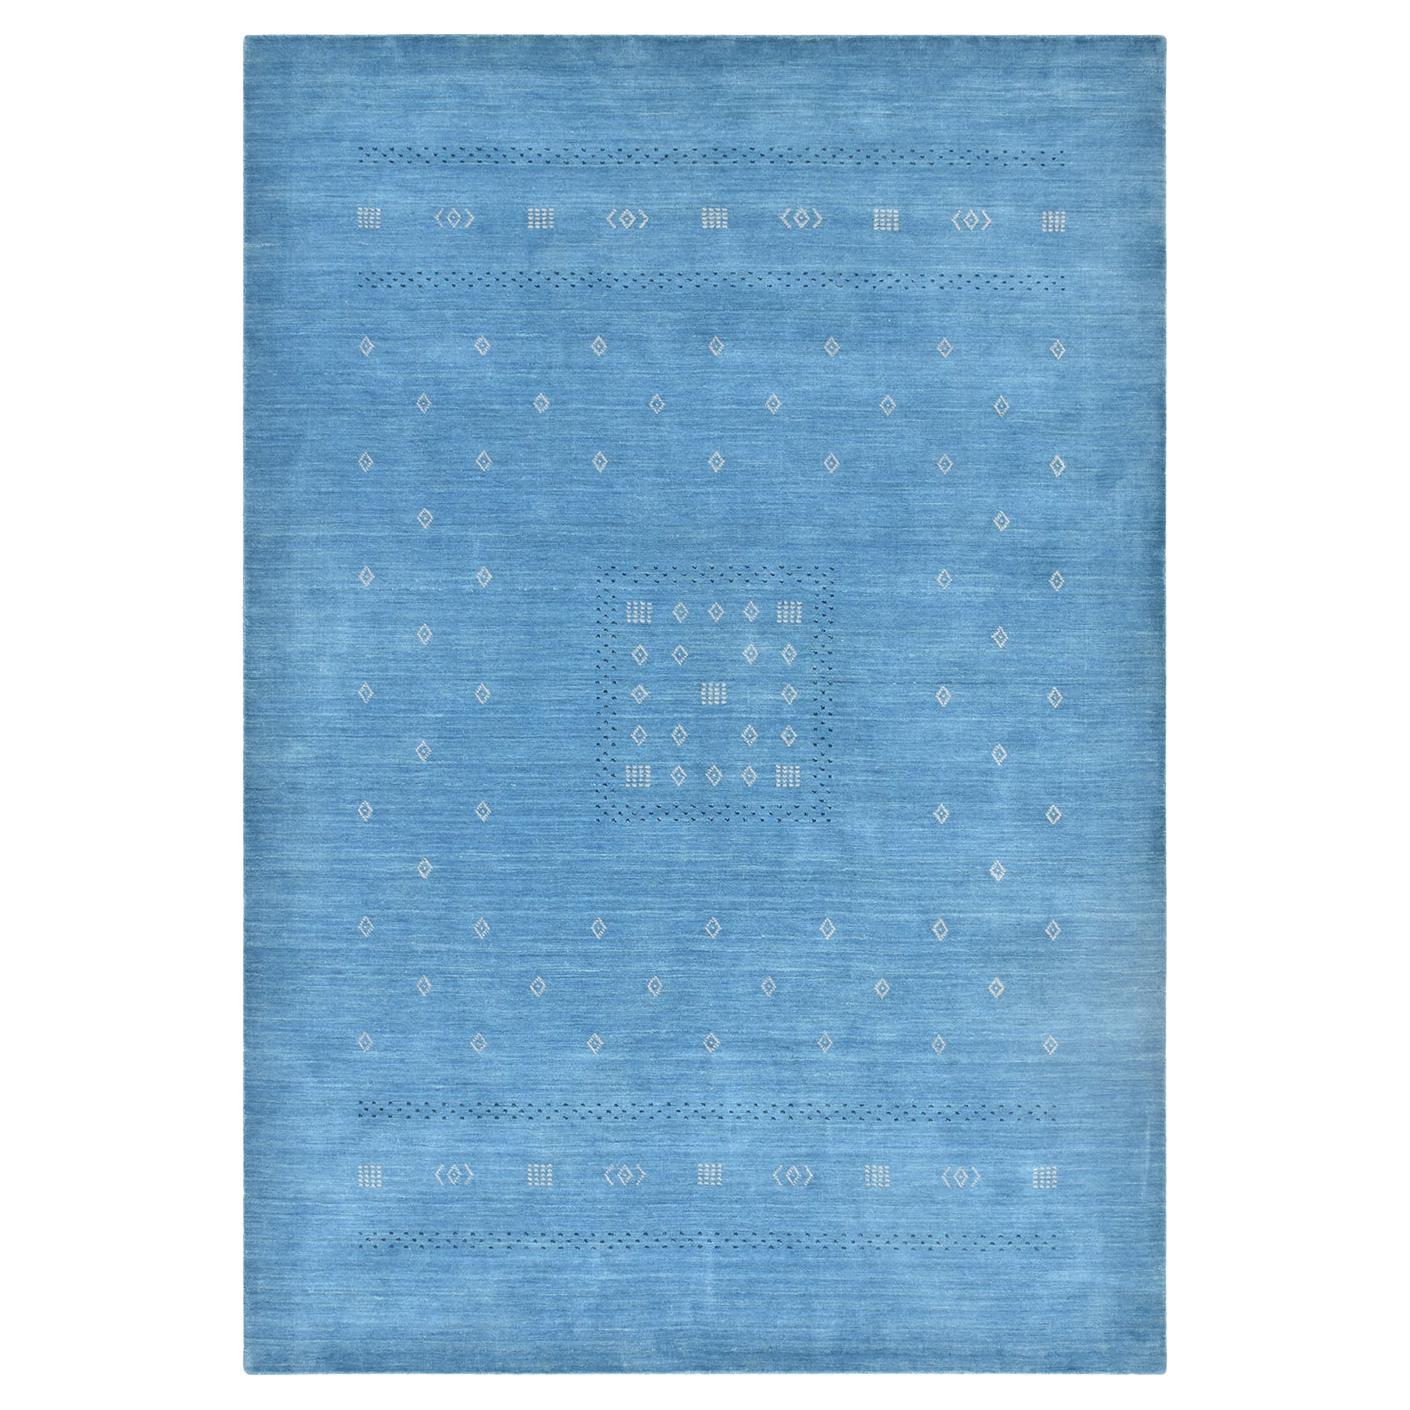 Solo Rugs Gabbeh Tribal Hand Loomed Blue Area Rug For Sale